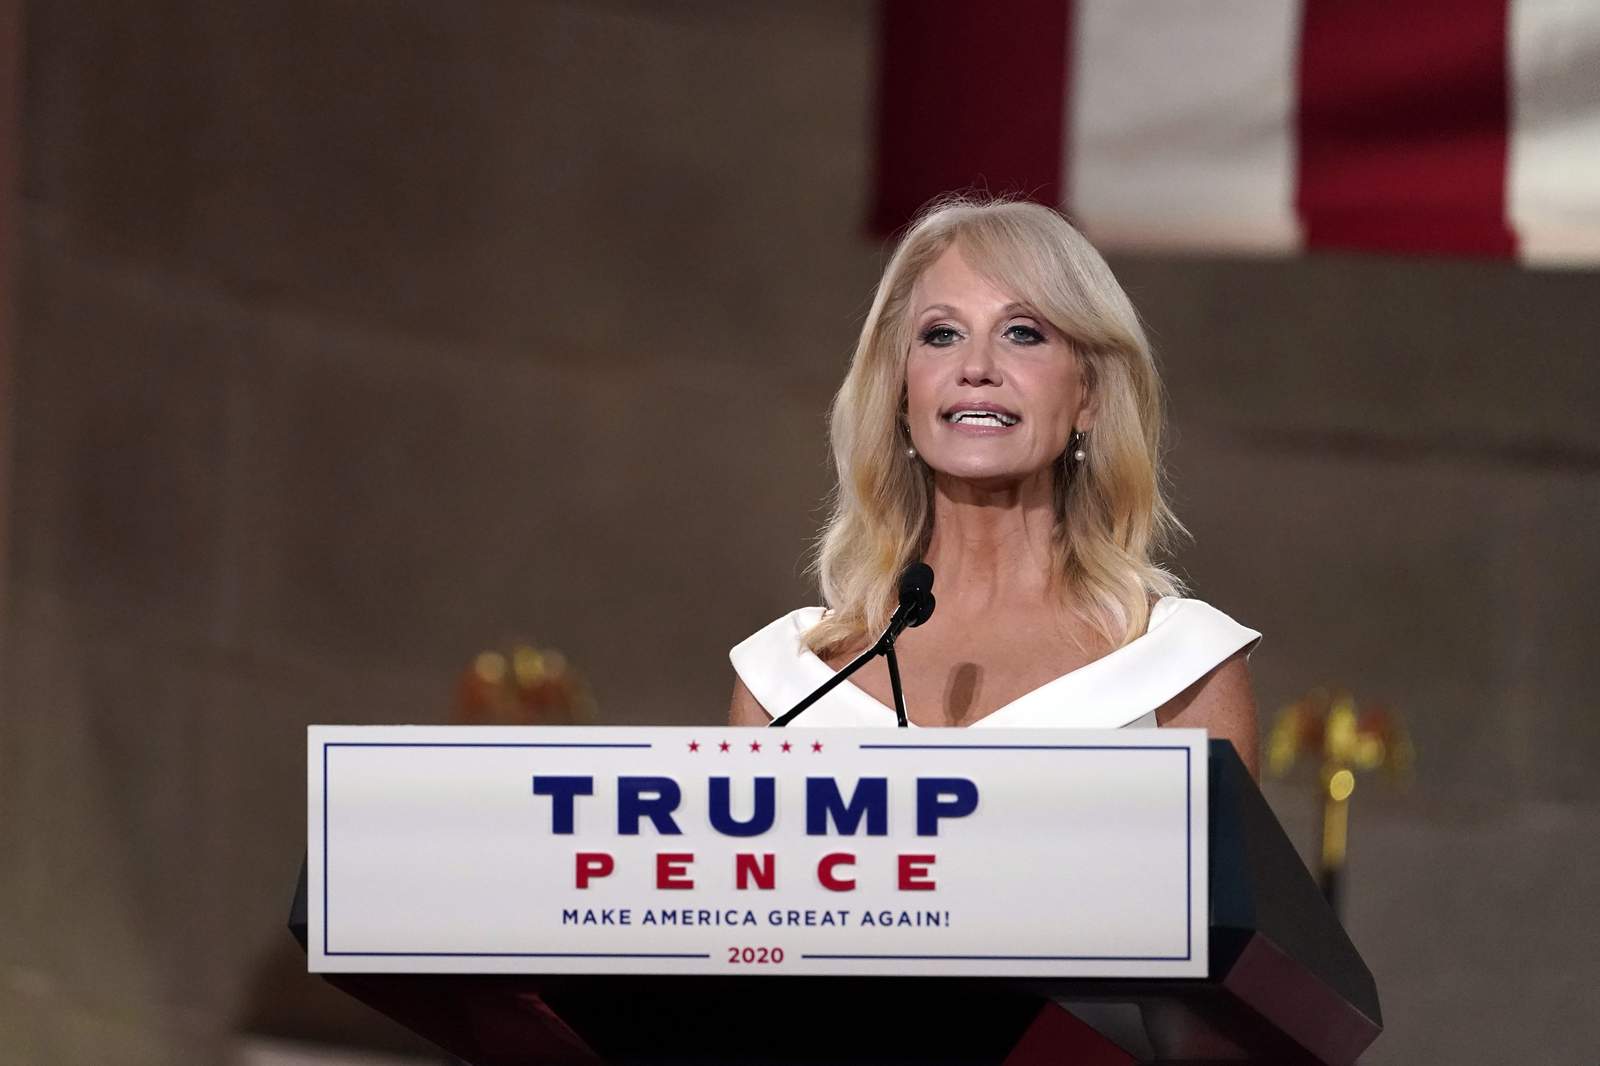 Kellyanne Conway says she tested positive for COVID-19